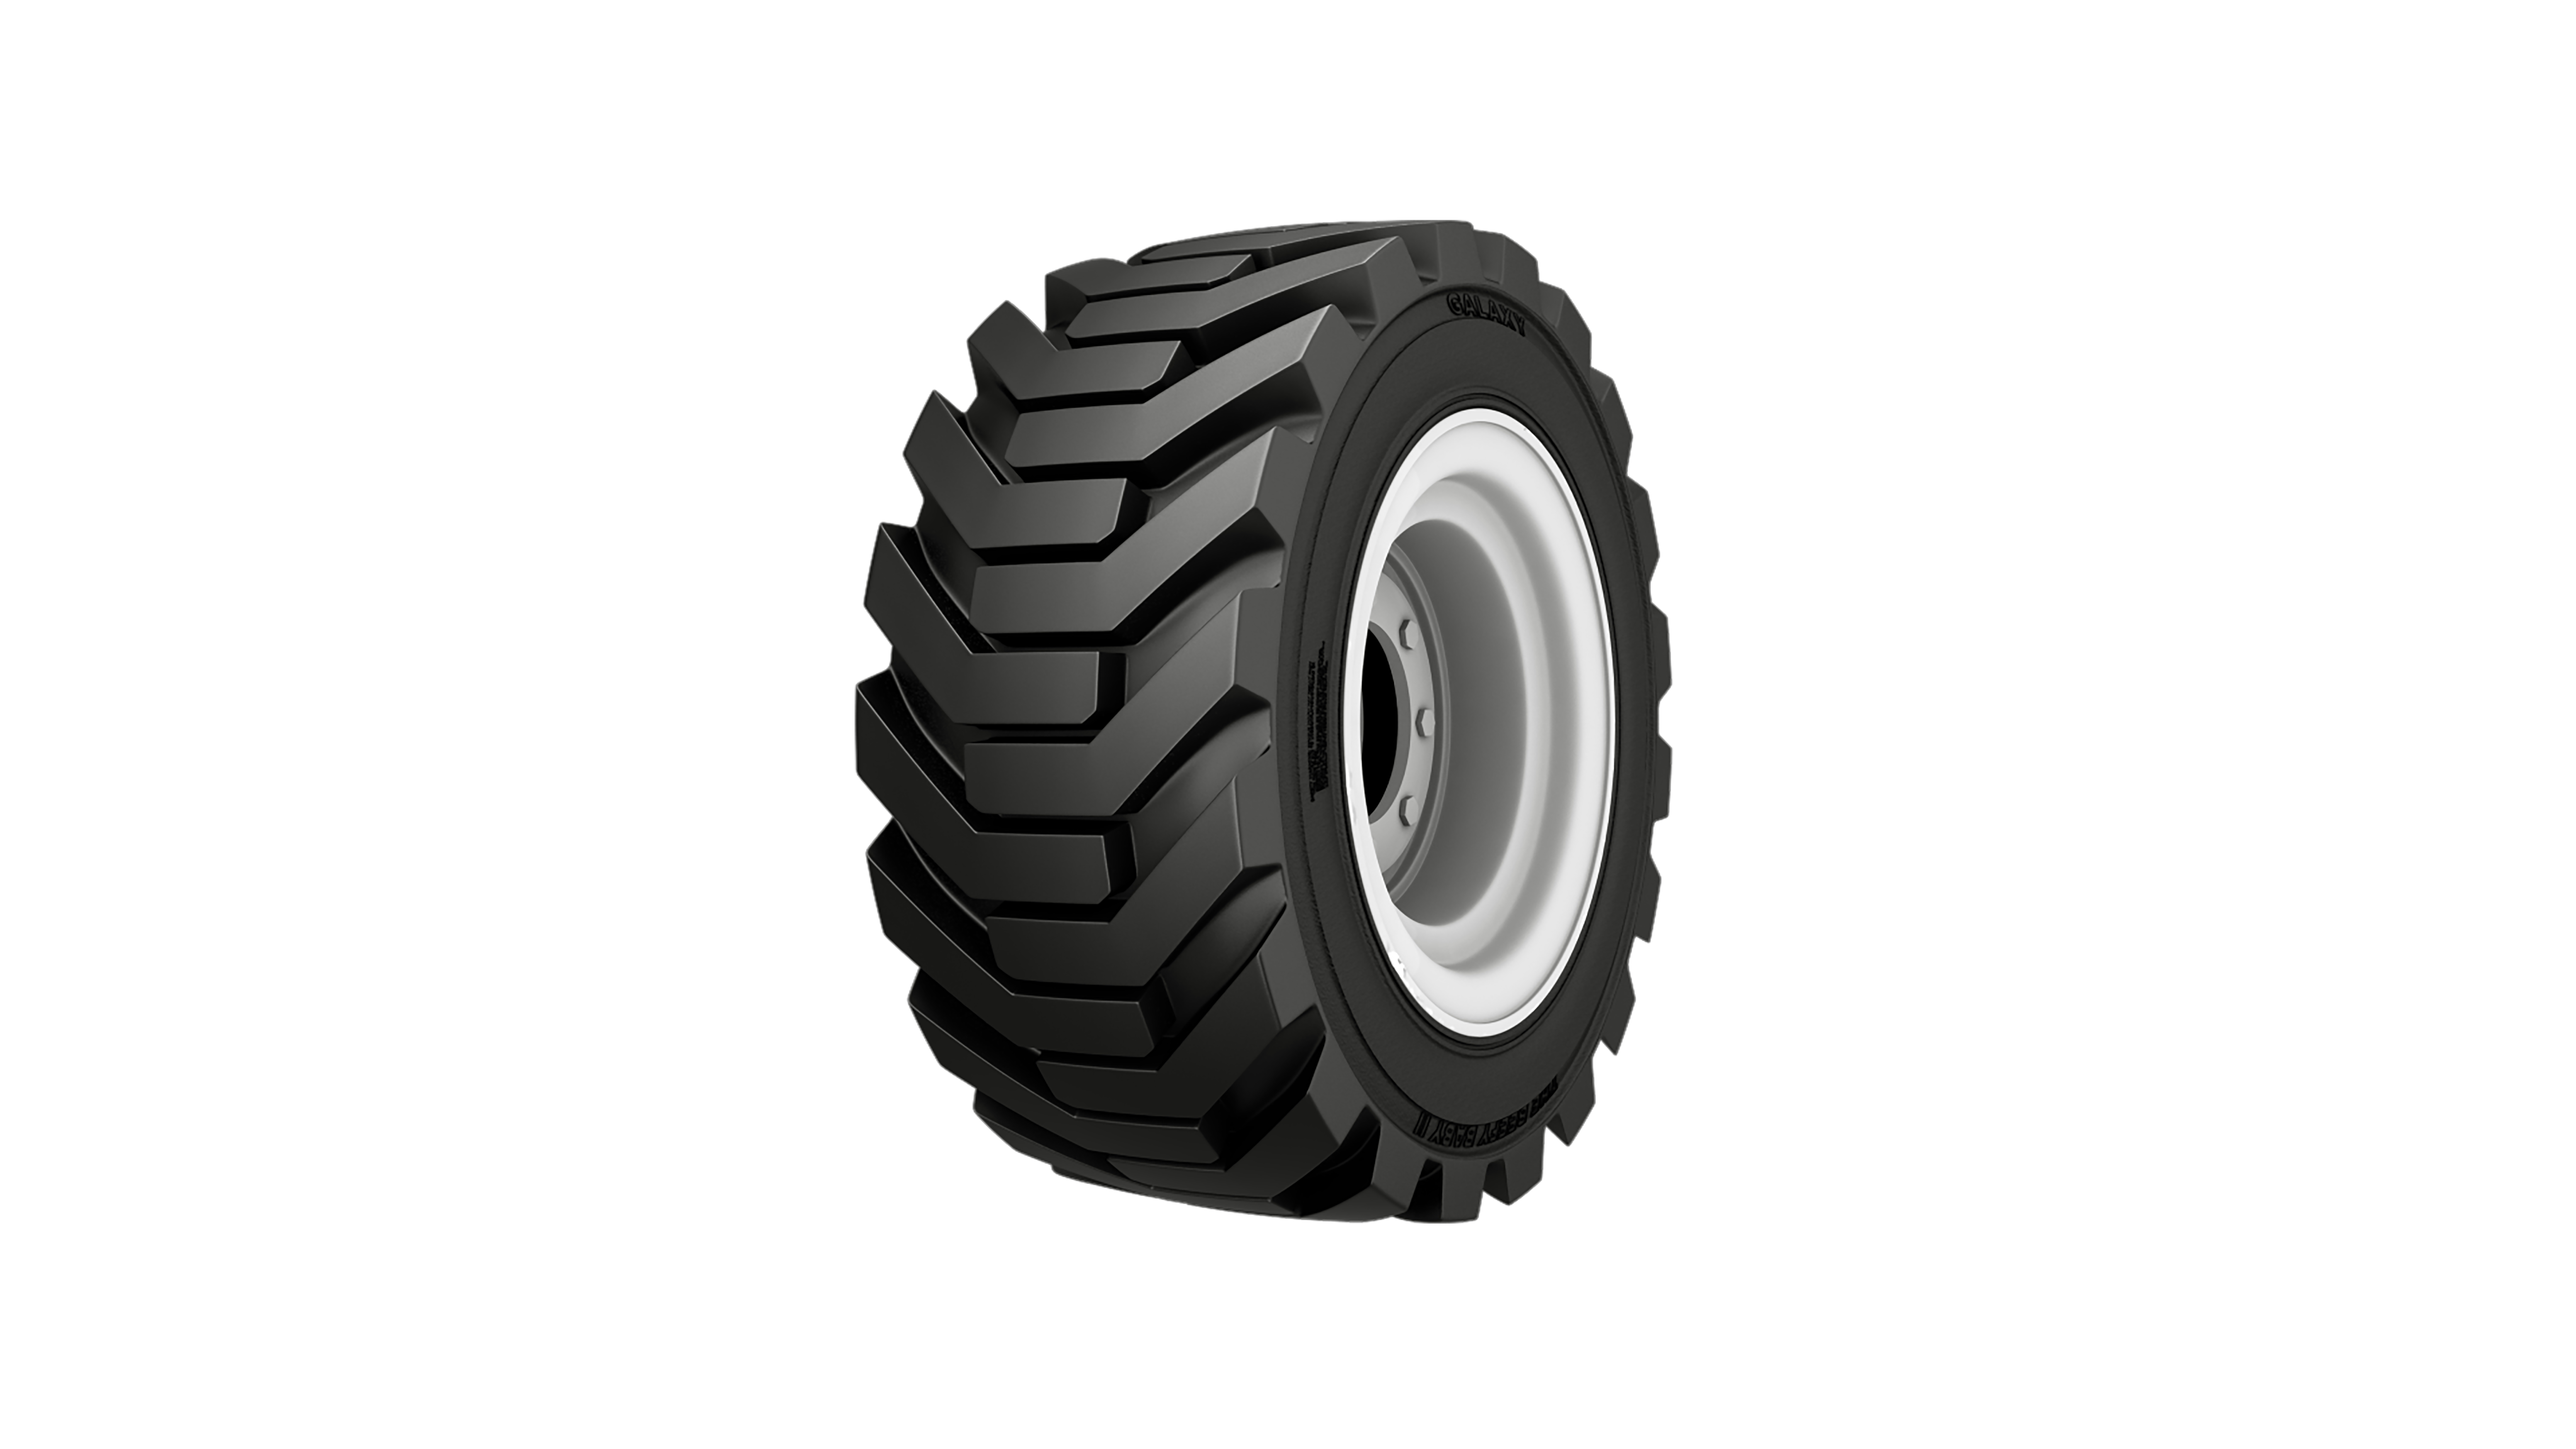 BEEFY BABY GALAXY CONSTRUCTION & INDUSTRIAL Tire